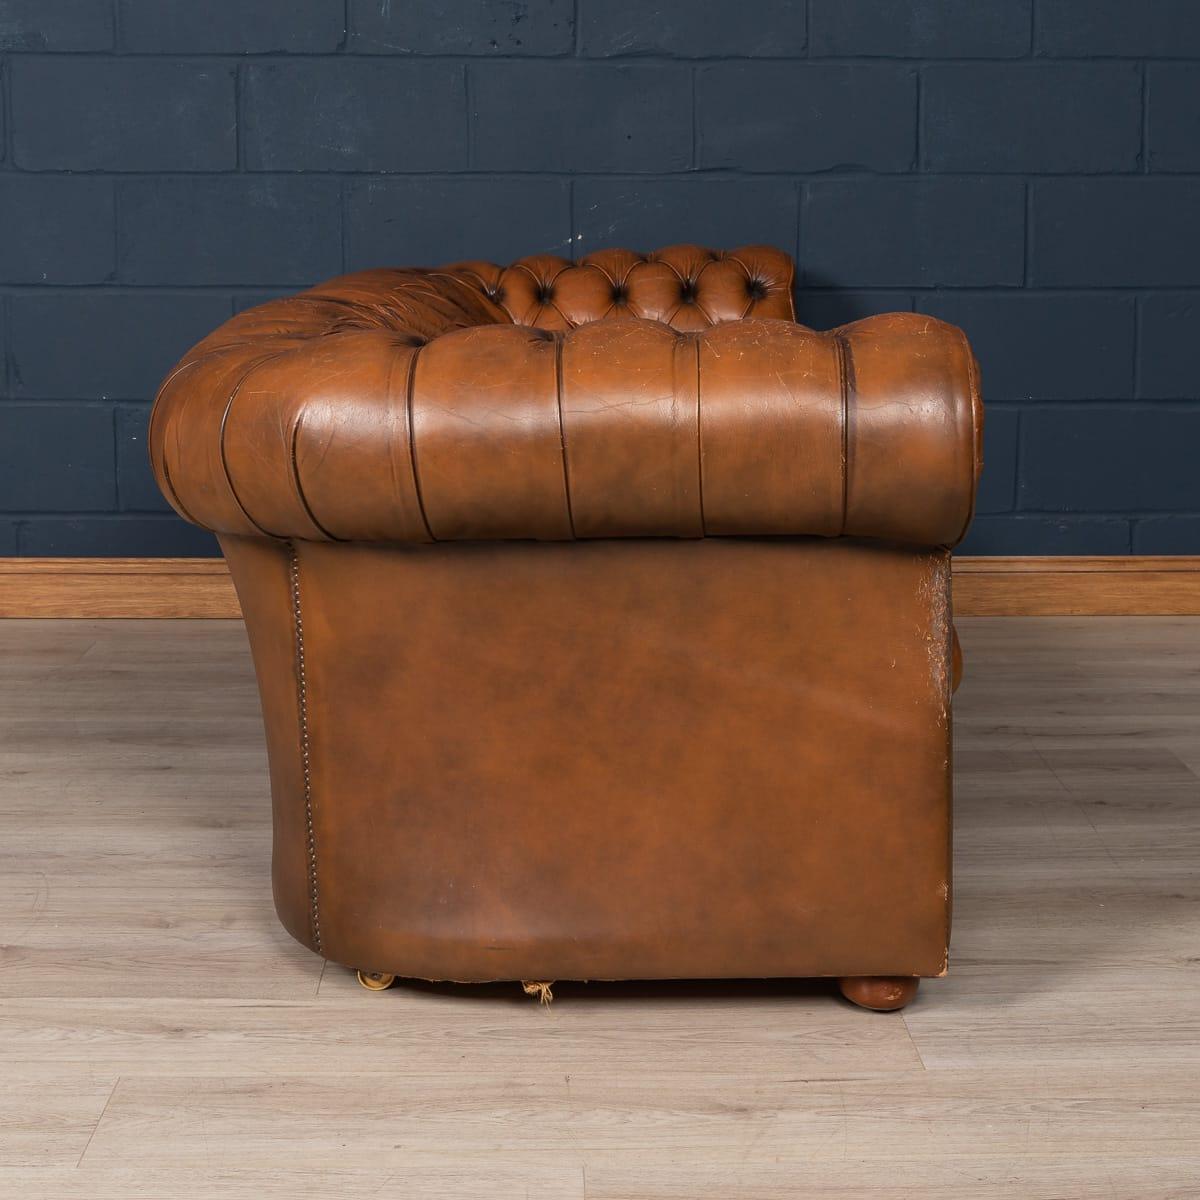 Lovely late 20th century leather chesterfield sofa. One of the most elegant models with button down seating, this is a fashionable item of furniture capable of uplifting the interior space of any contemporary or traditional home, the classic colour